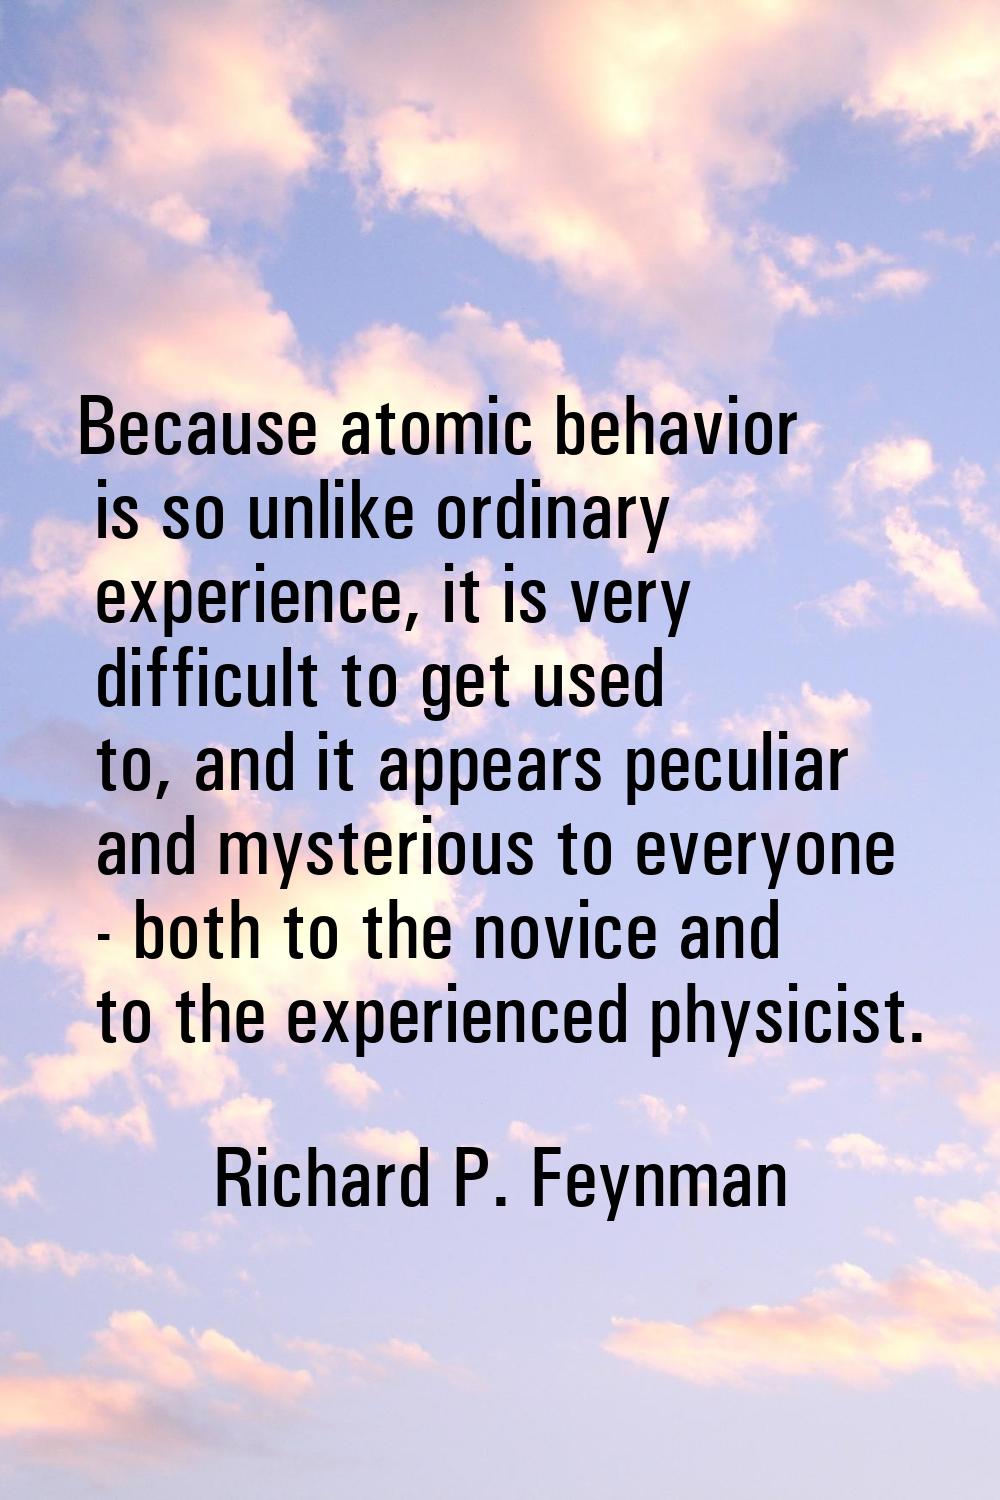 Because atomic behavior is so unlike ordinary experience, it is very difficult to get used to, and 